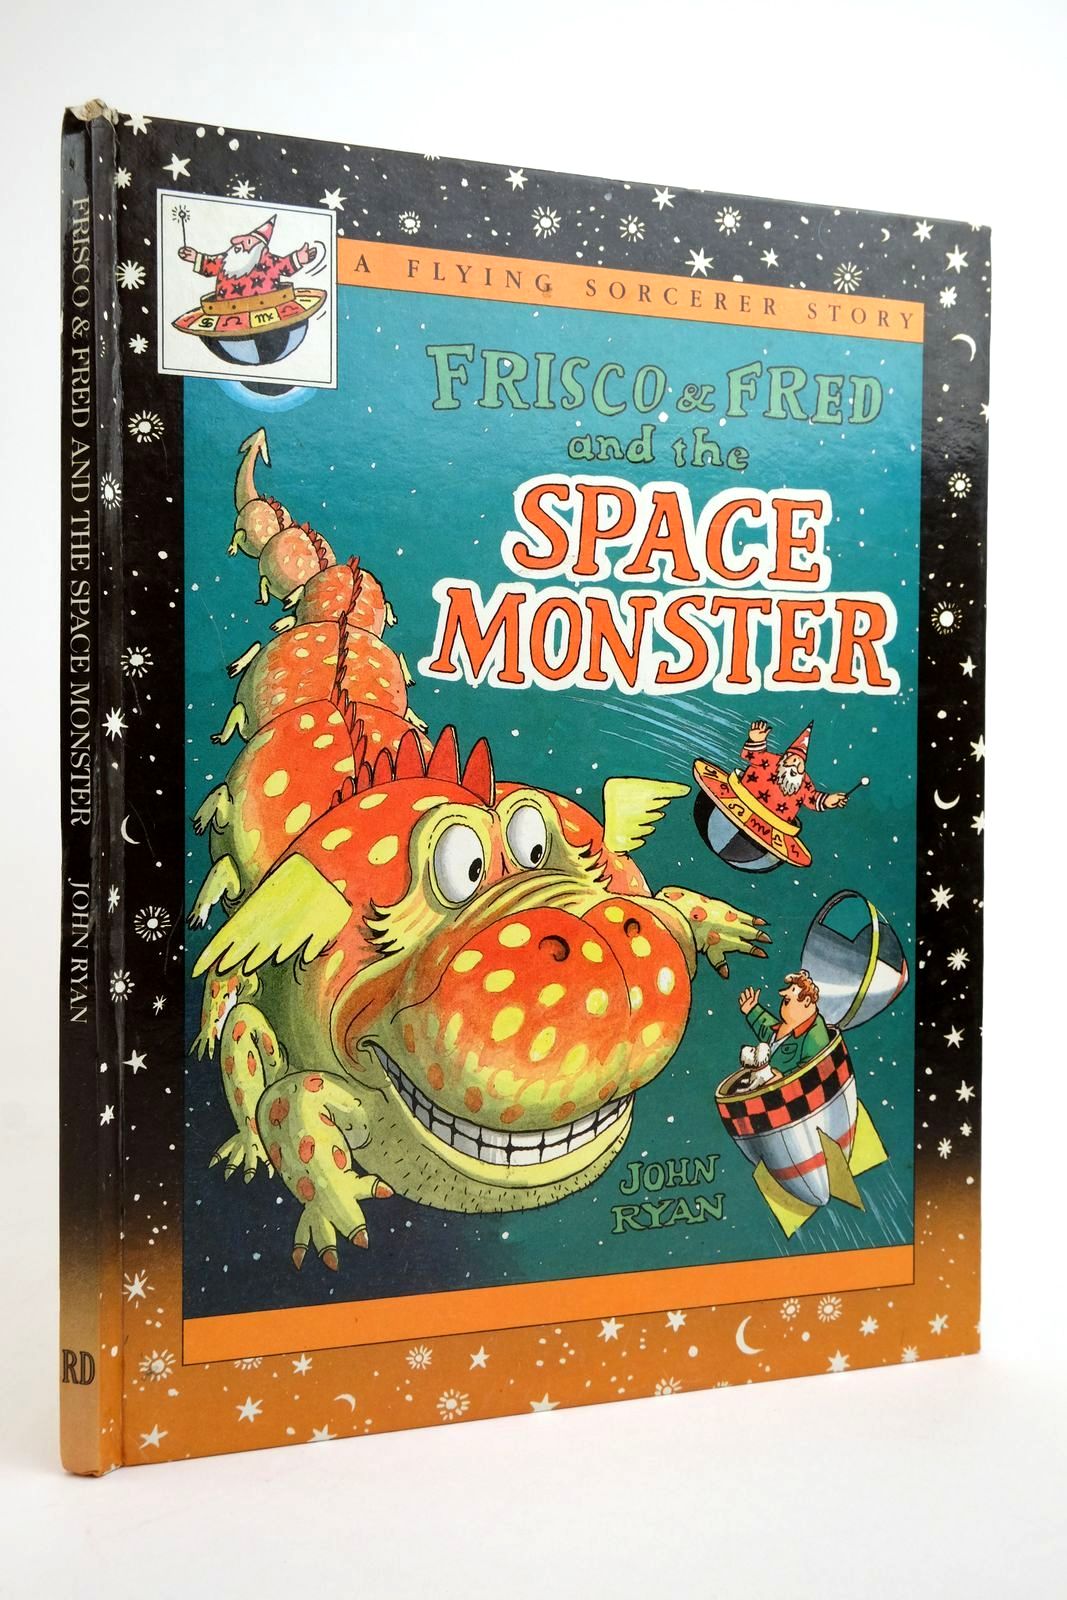 Photo of FRISCO & FRED AND THE SPACE MONSTER written by Ryan, John illustrated by Ryan, John published by Richard Drew Publishing (STOCK CODE: 2135586)  for sale by Stella & Rose's Books